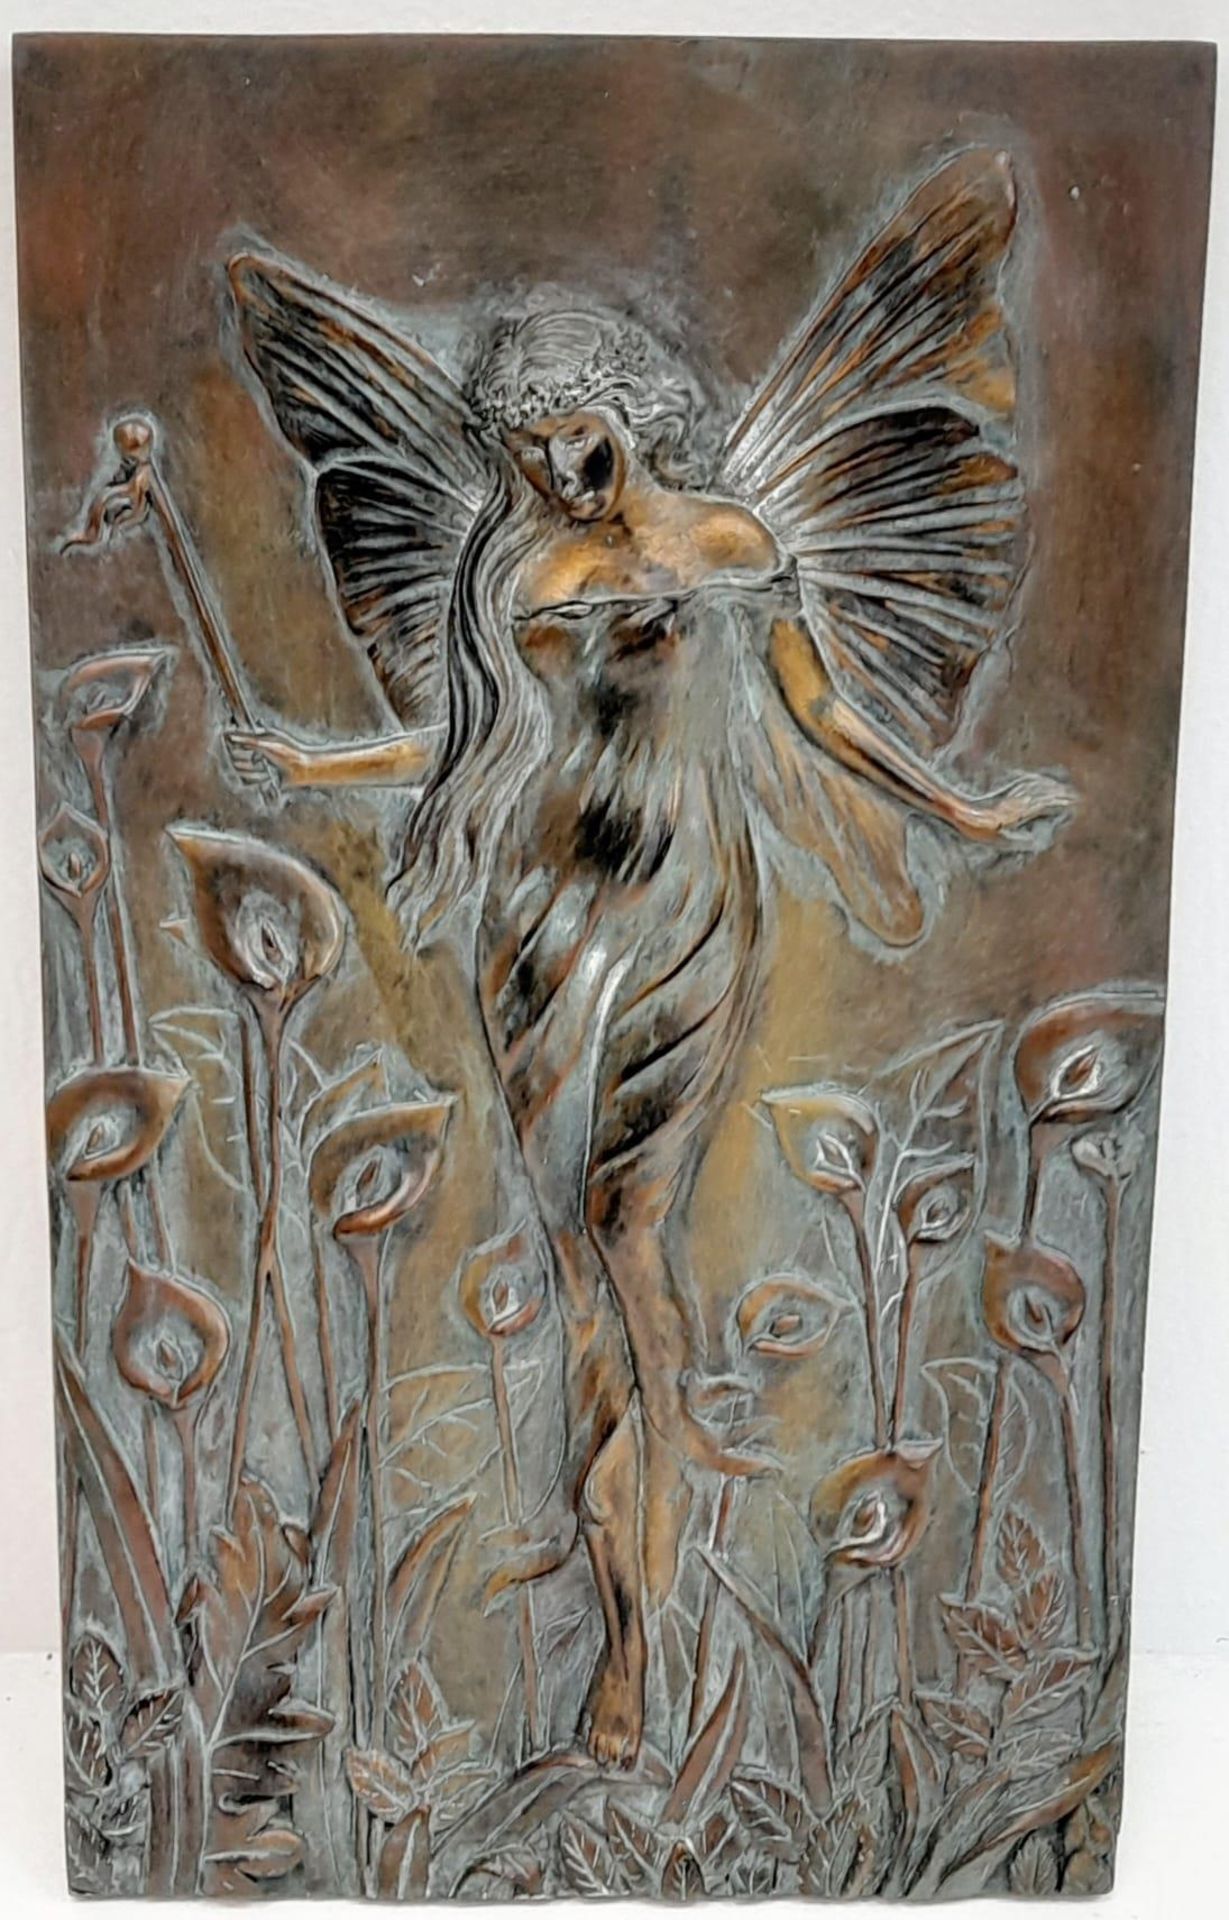 A Vintage Bronzed Art Nouveau Design Wall Plaque Relief of a Water Nymph or Fairy made by Past